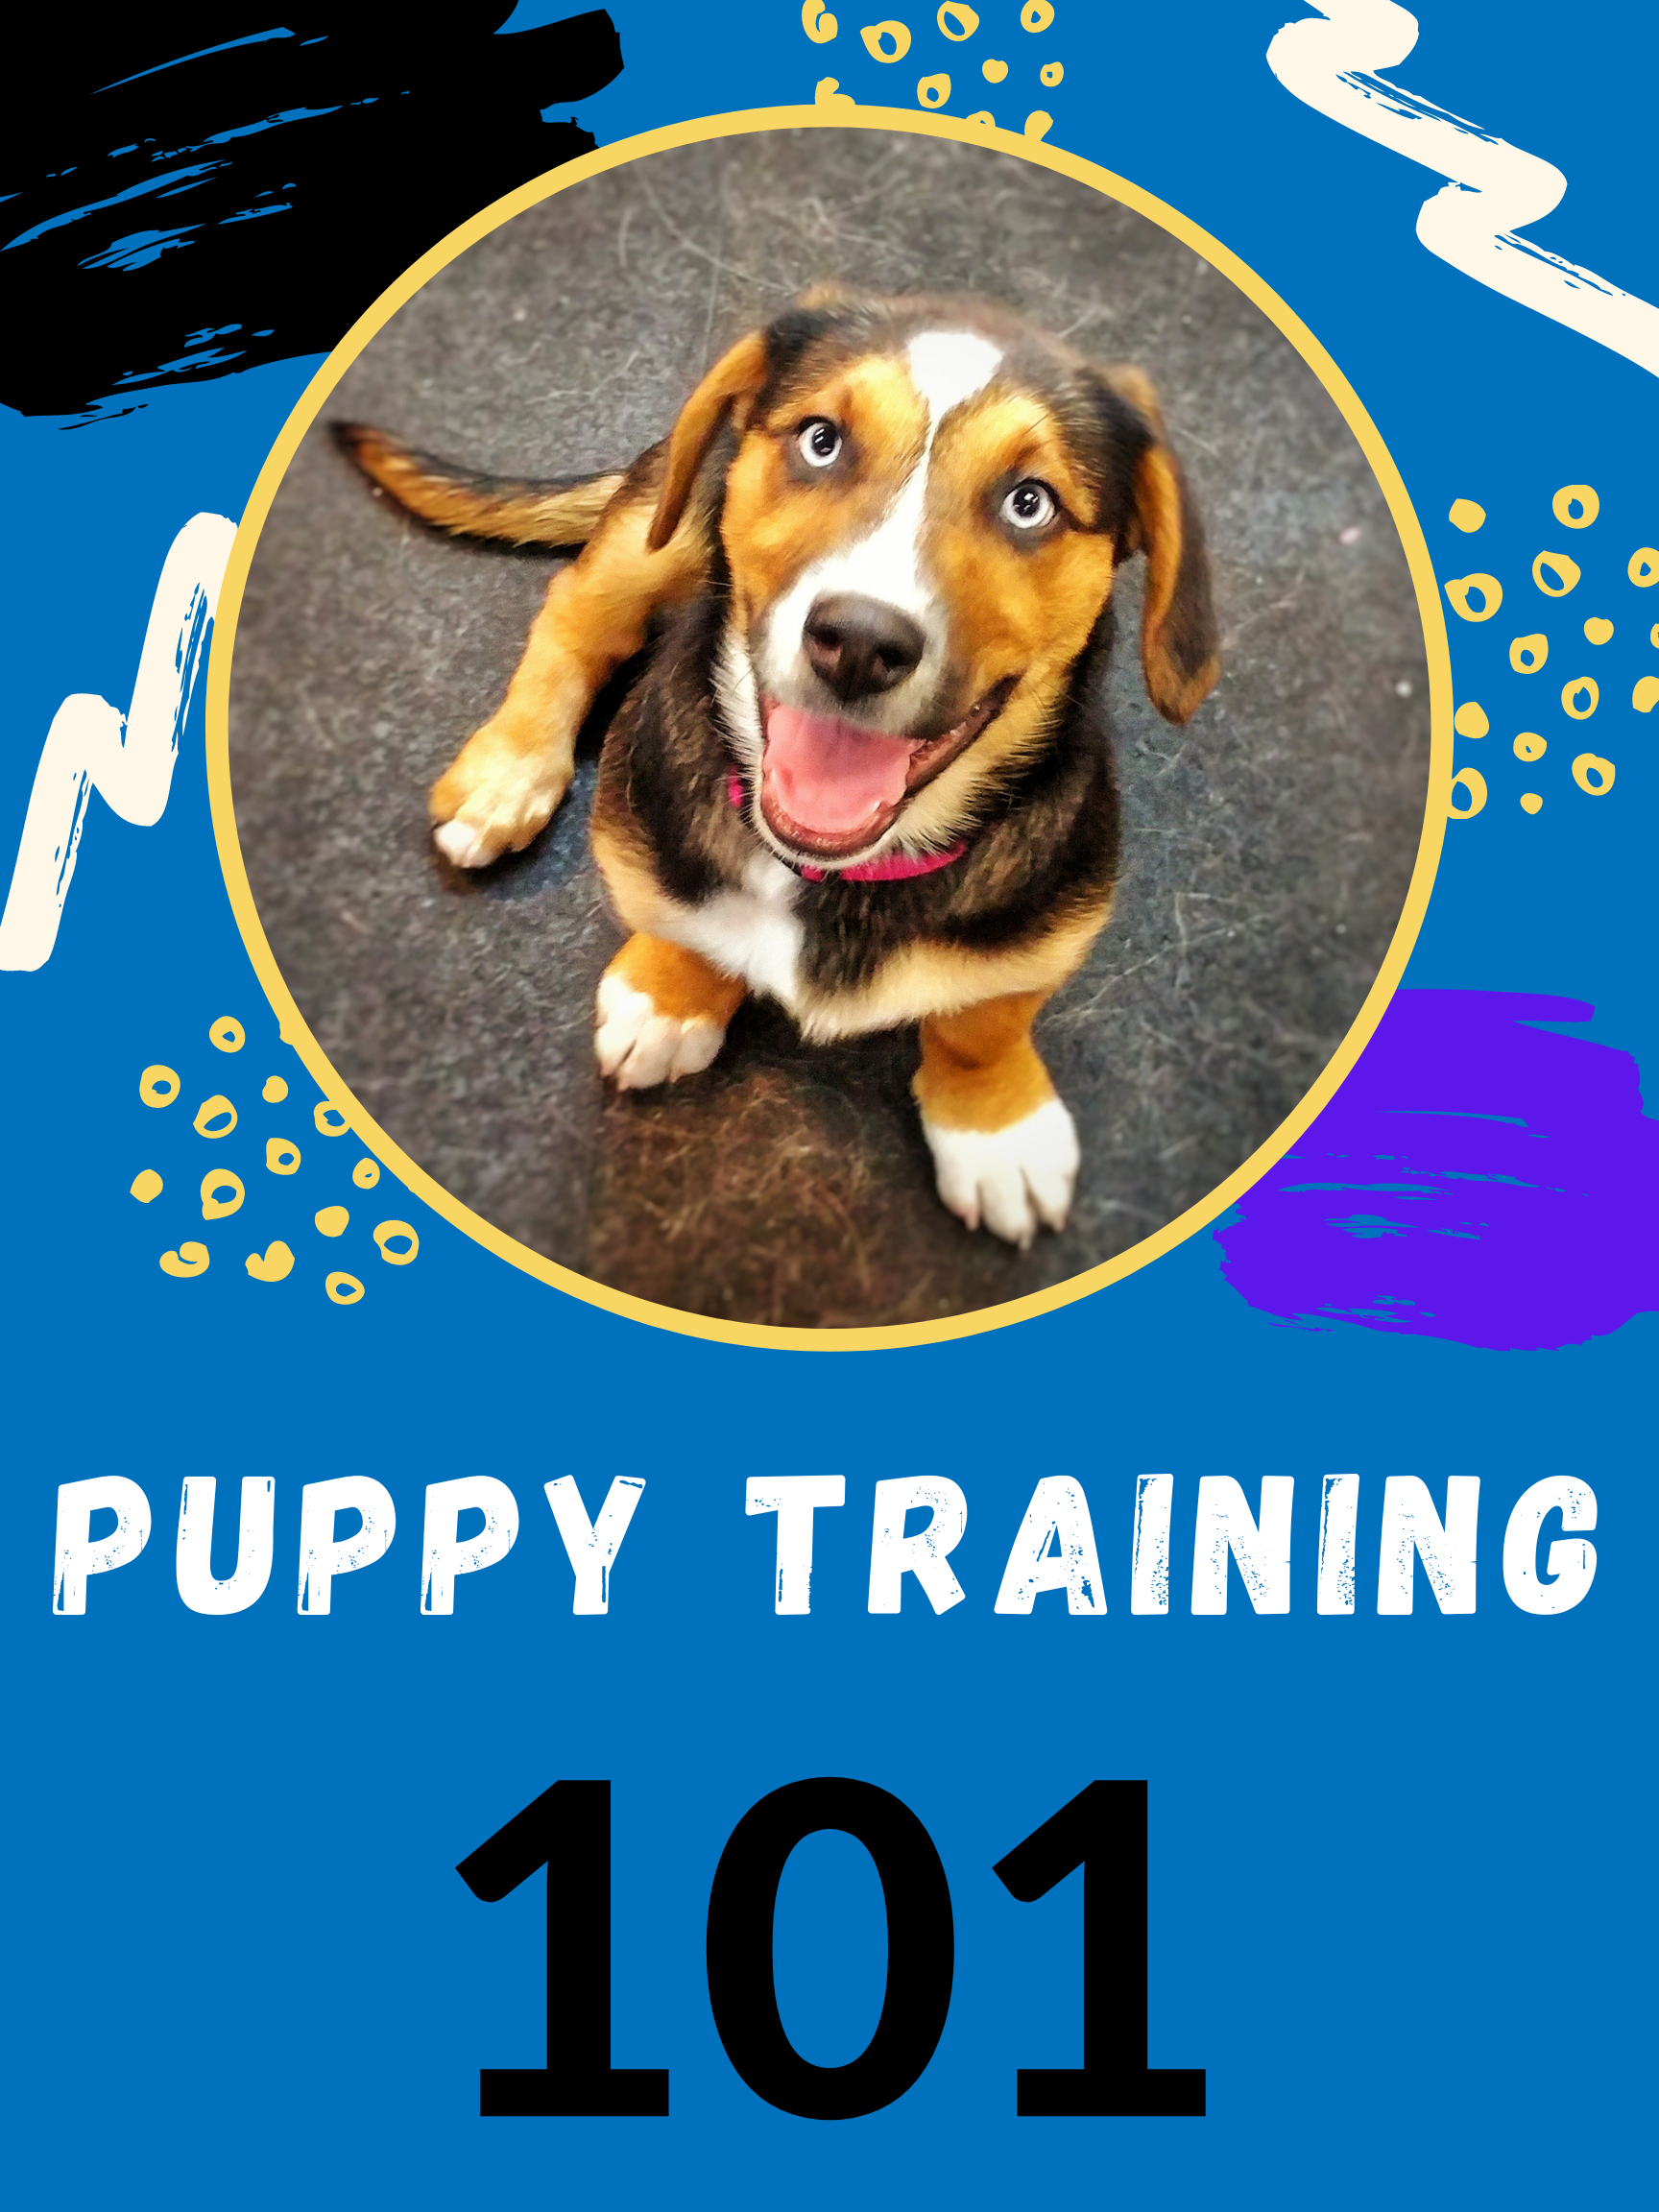 Puppy Training 101-All You Need To Know To Get Stared With Your Puppy